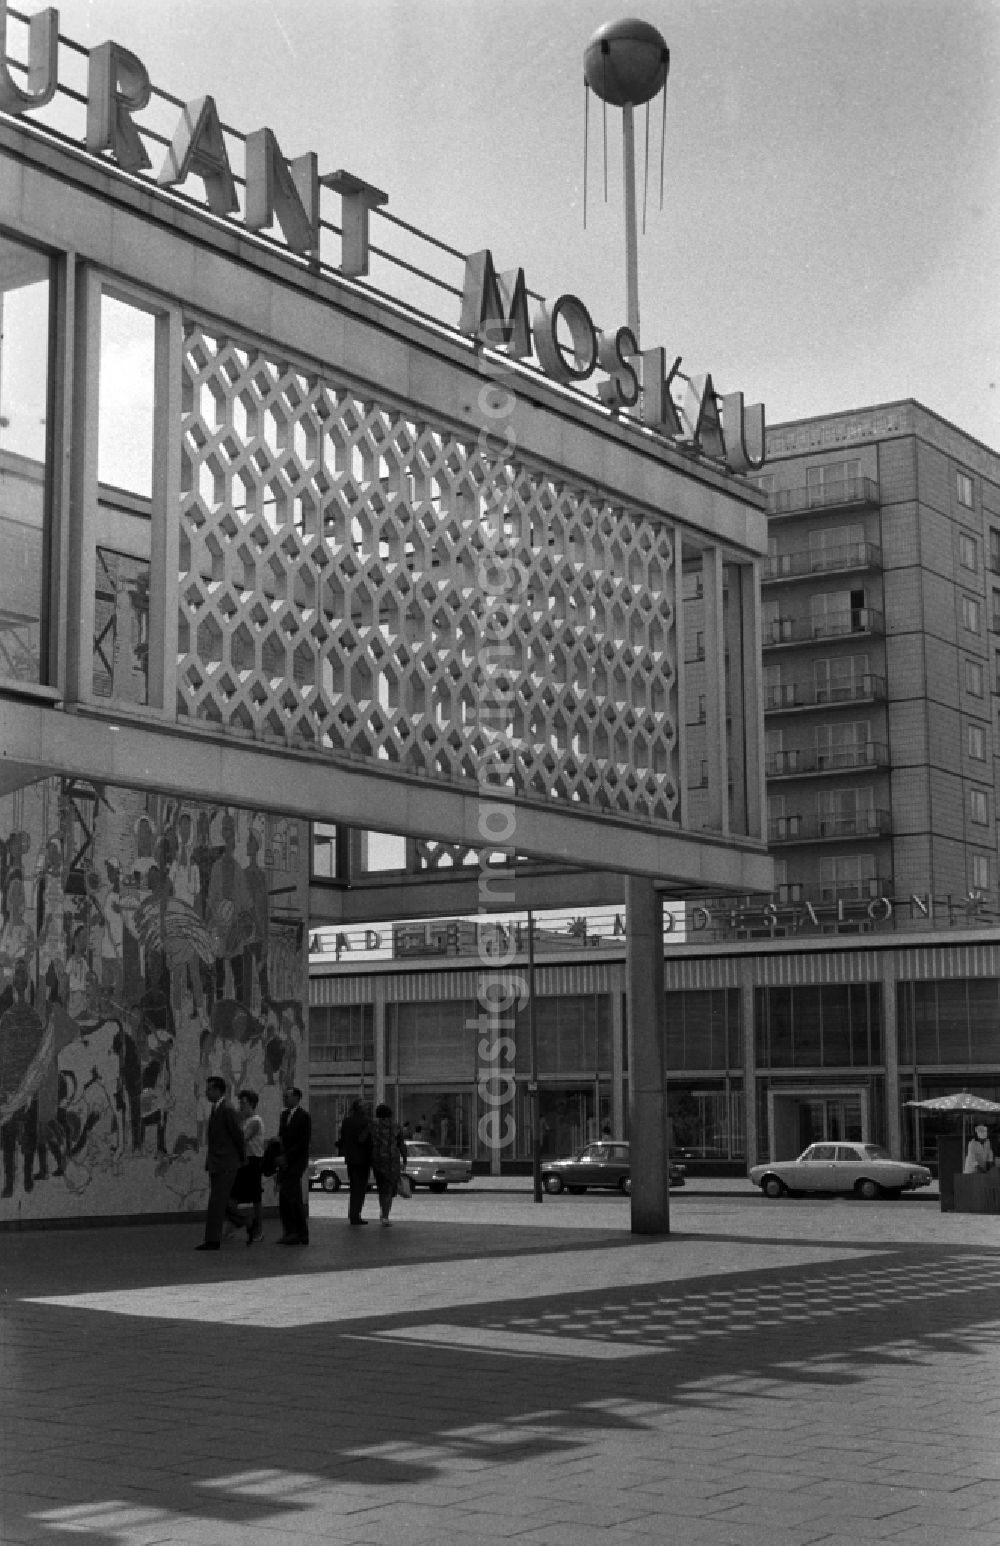 GDR image archive: Berlin - Friedrichshain - The listed building of Moscow Cafe in the Karl-Marx-Allee is located opposite the cinema International in Berlin - Mitte. The Sputnik in size was mounted on the facade is a gift of the then Ambassador of the USSR in the GDR. Striking is the open atrium design of the building. The entrance to the Karl-Marx-Allee is decorated with a large mosaic entitled The life of the peoples of the Soviet Union